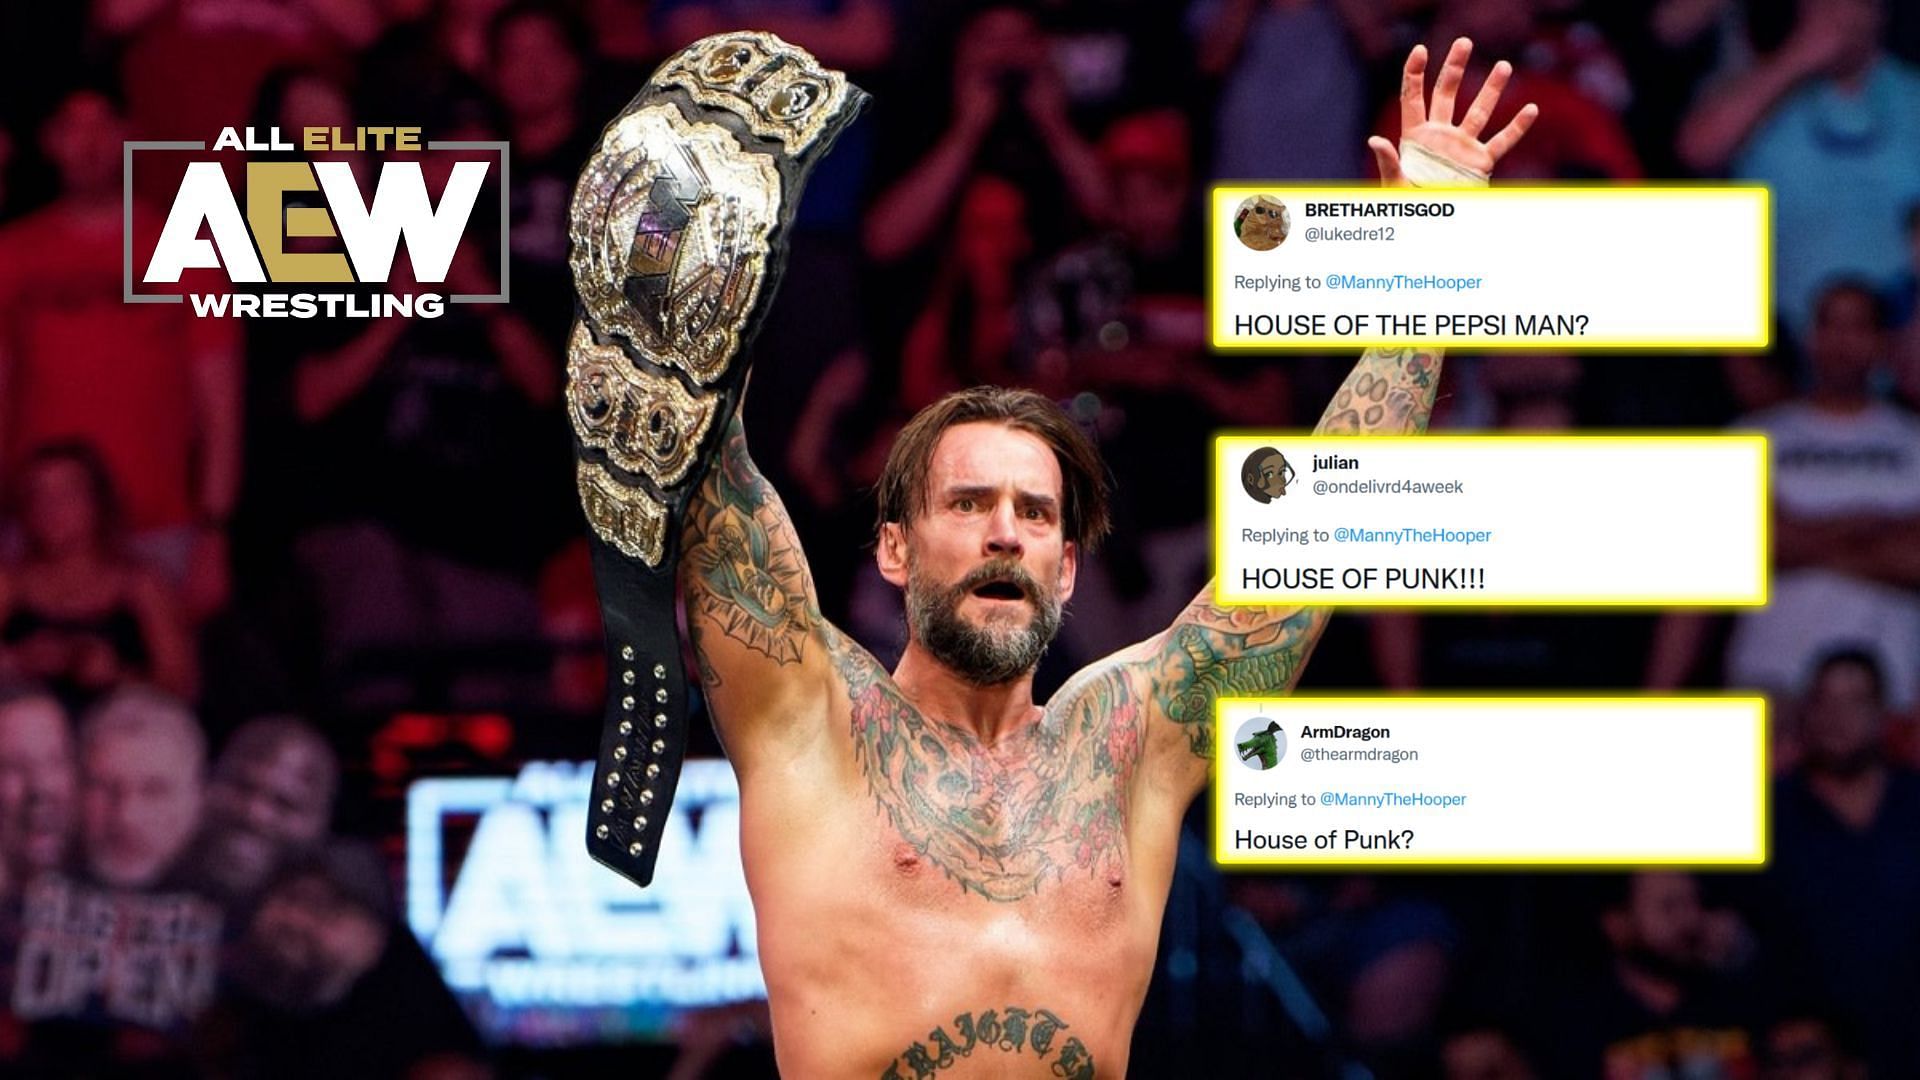 CM Punk won AEW championship at Double or Nothing 2022